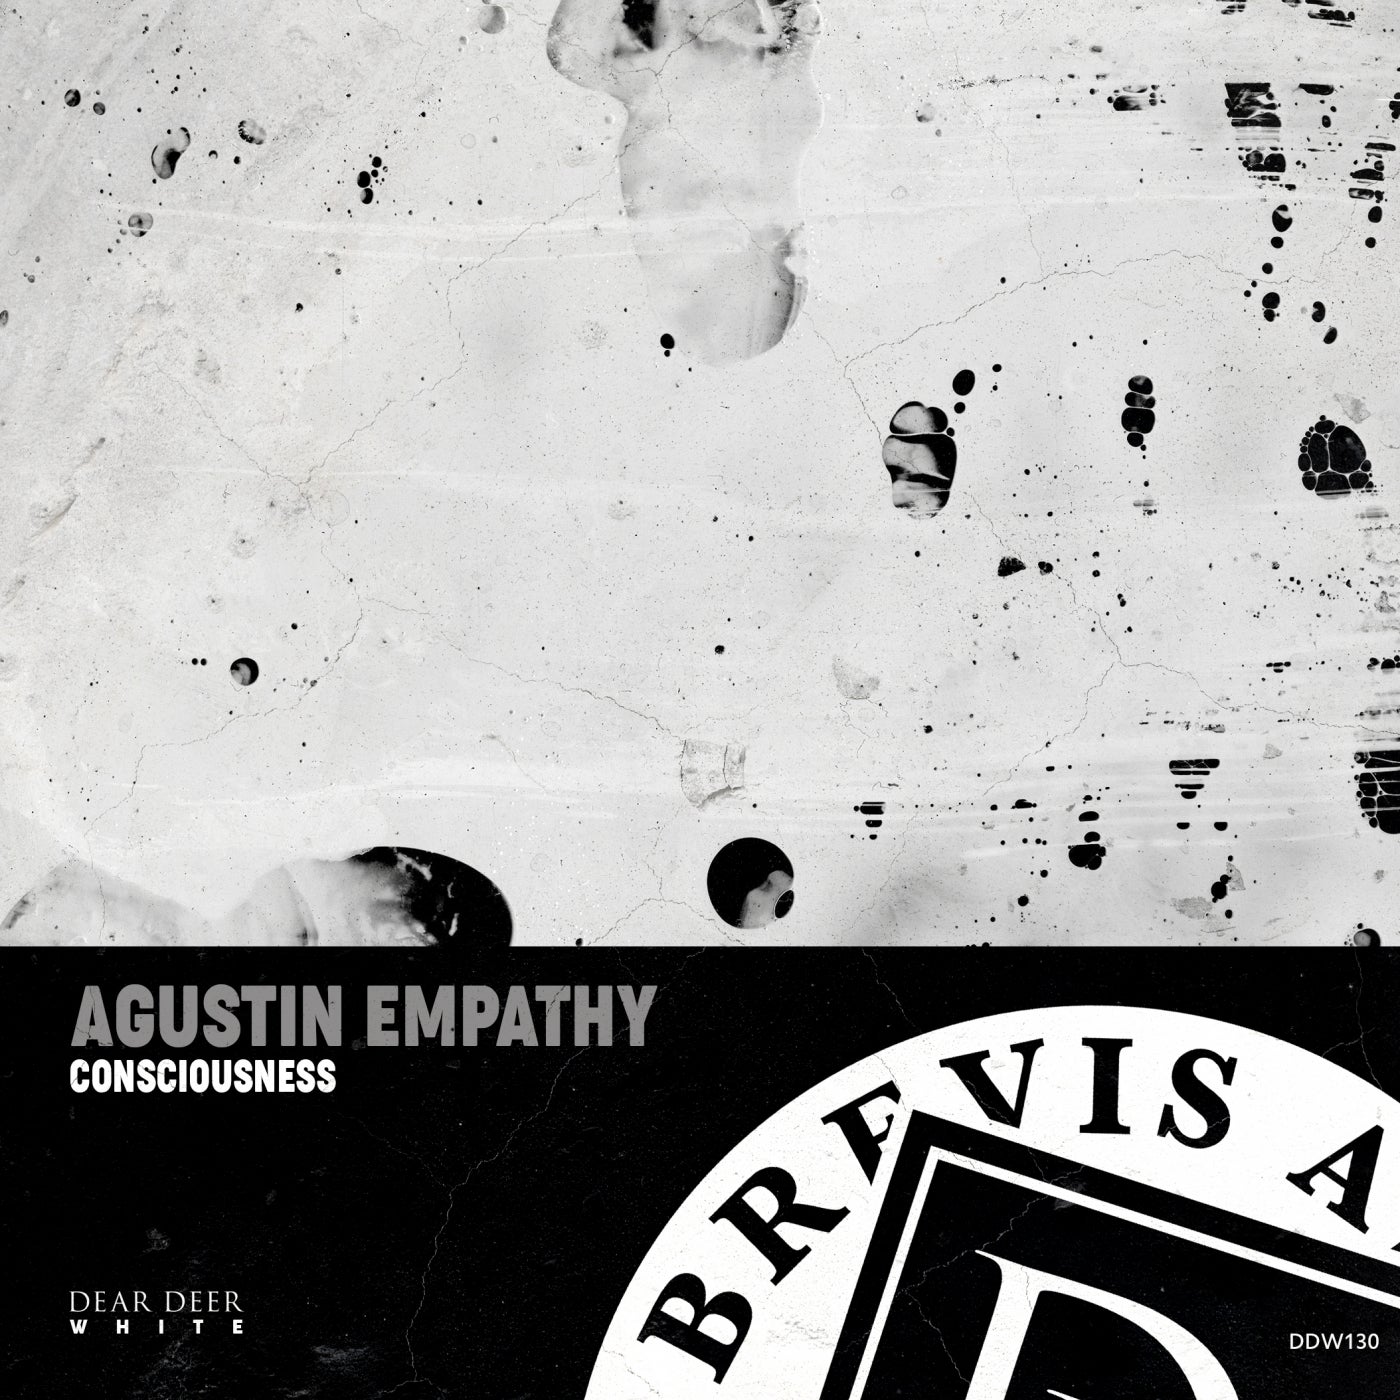 image cover: Agustin Empathy - Consciousness / DDW130